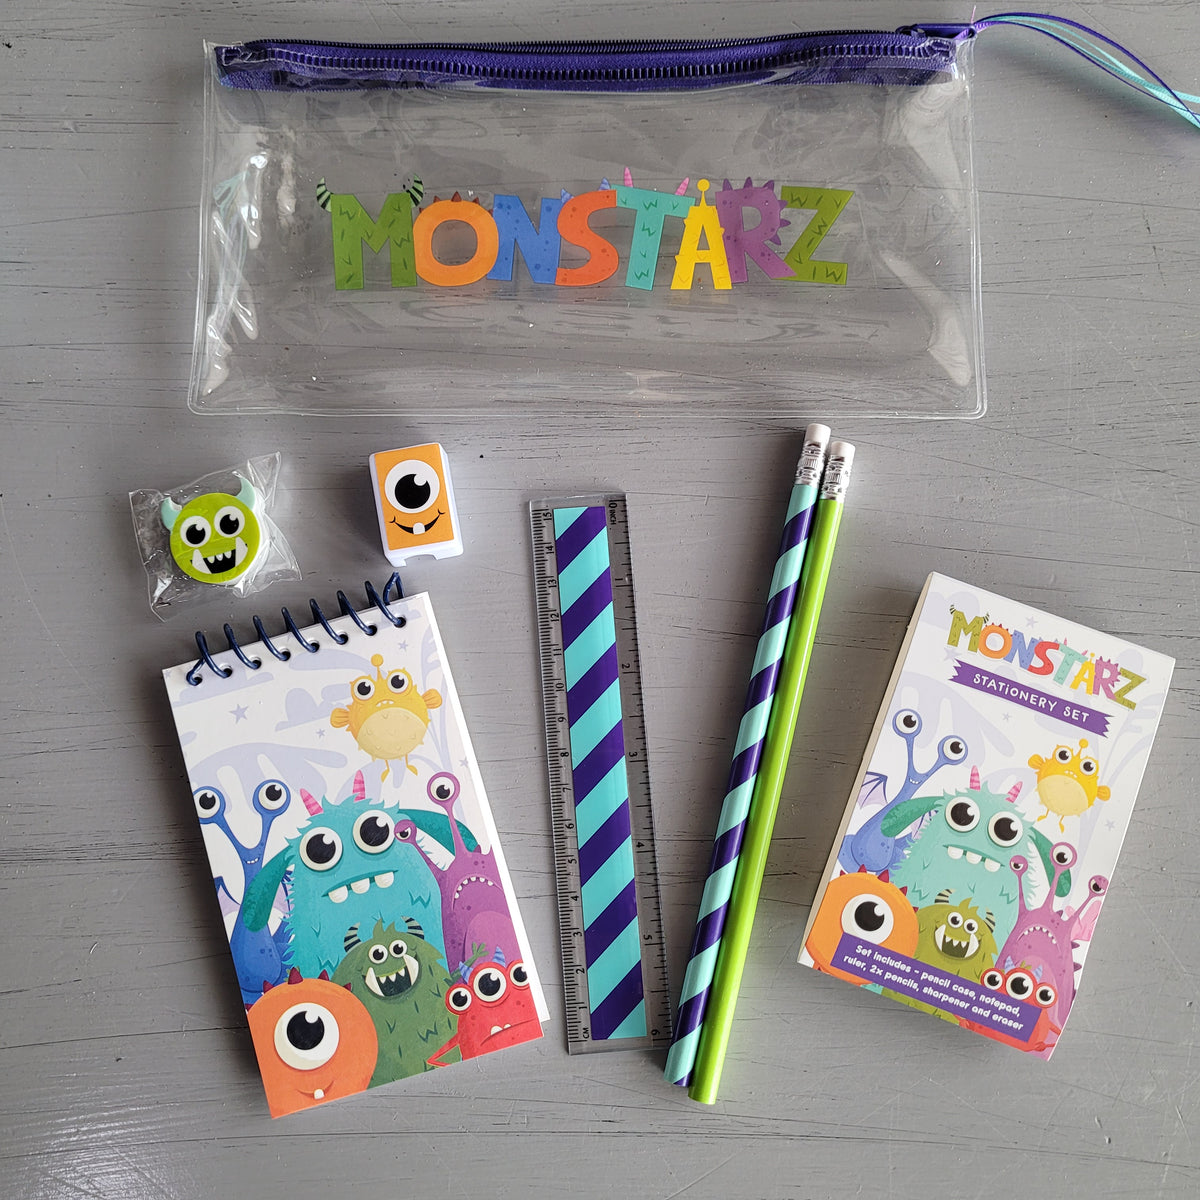 7 Piece Monster Stationary Set – Monsters on Main